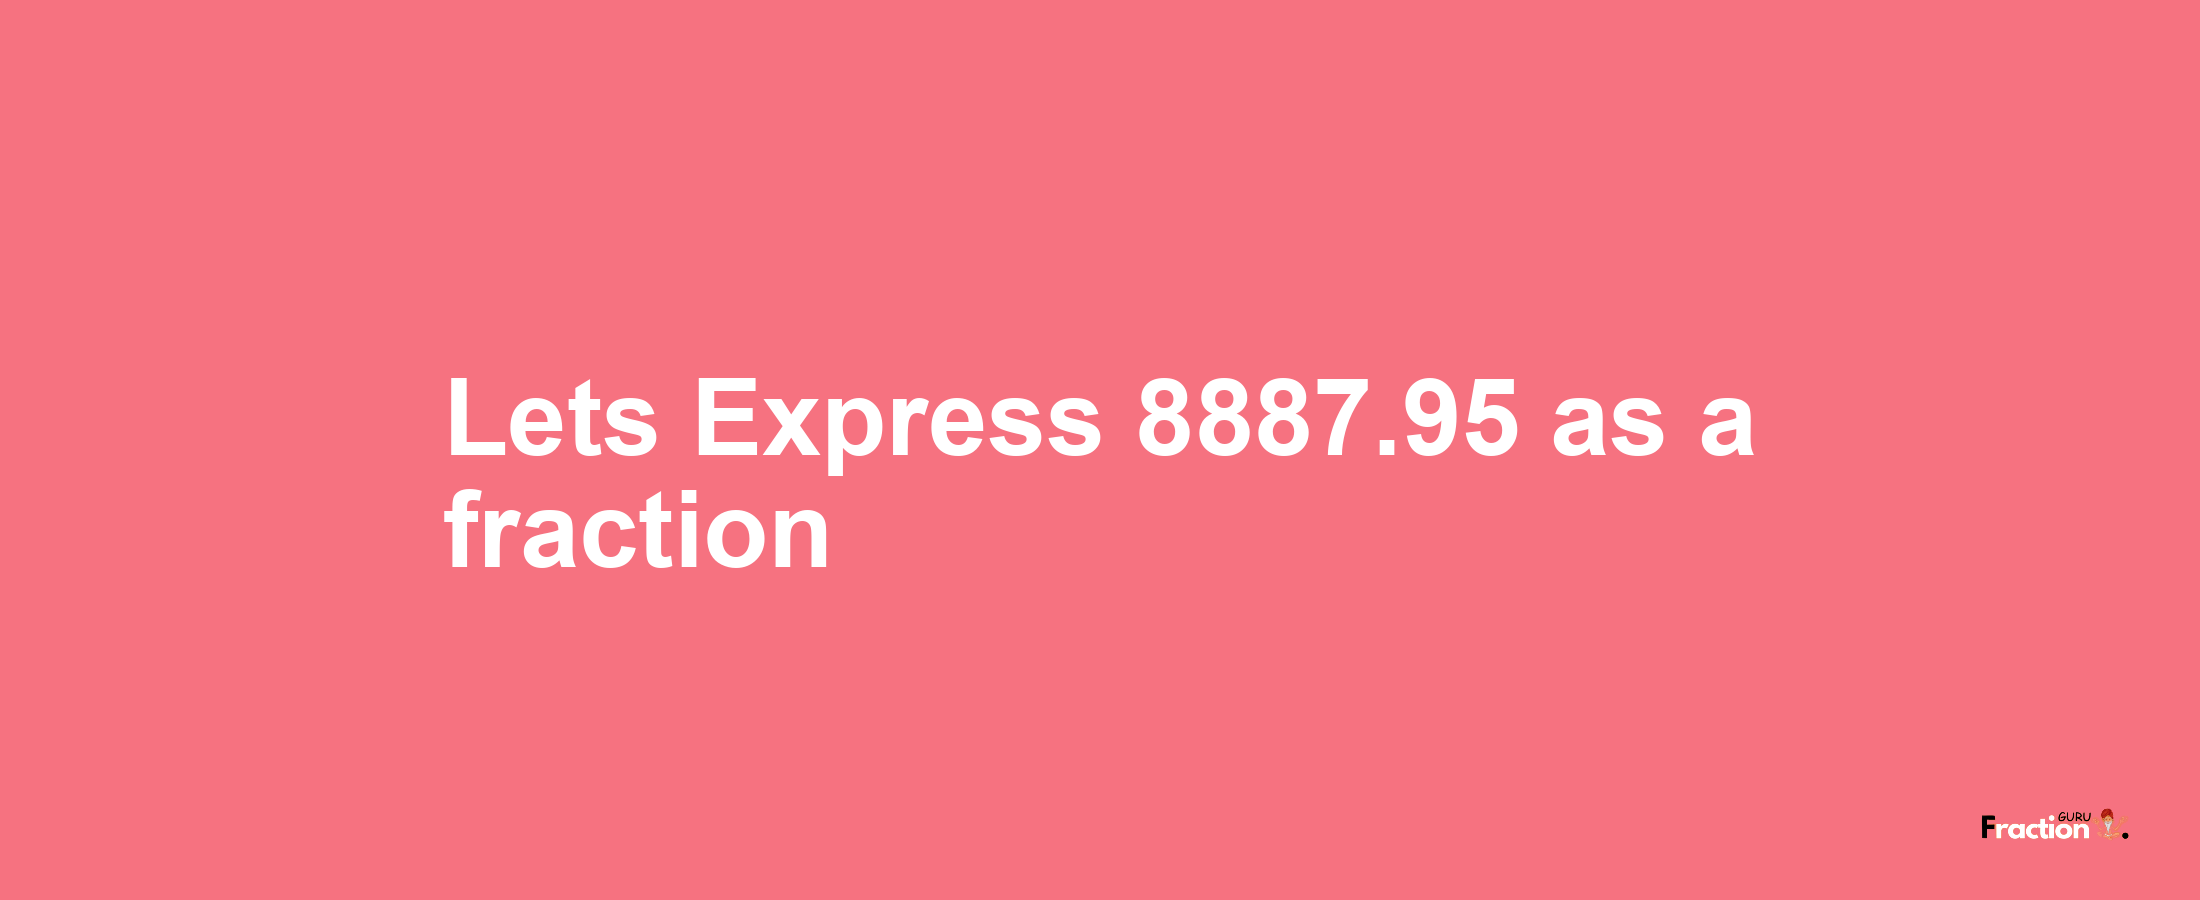 Lets Express 8887.95 as afraction